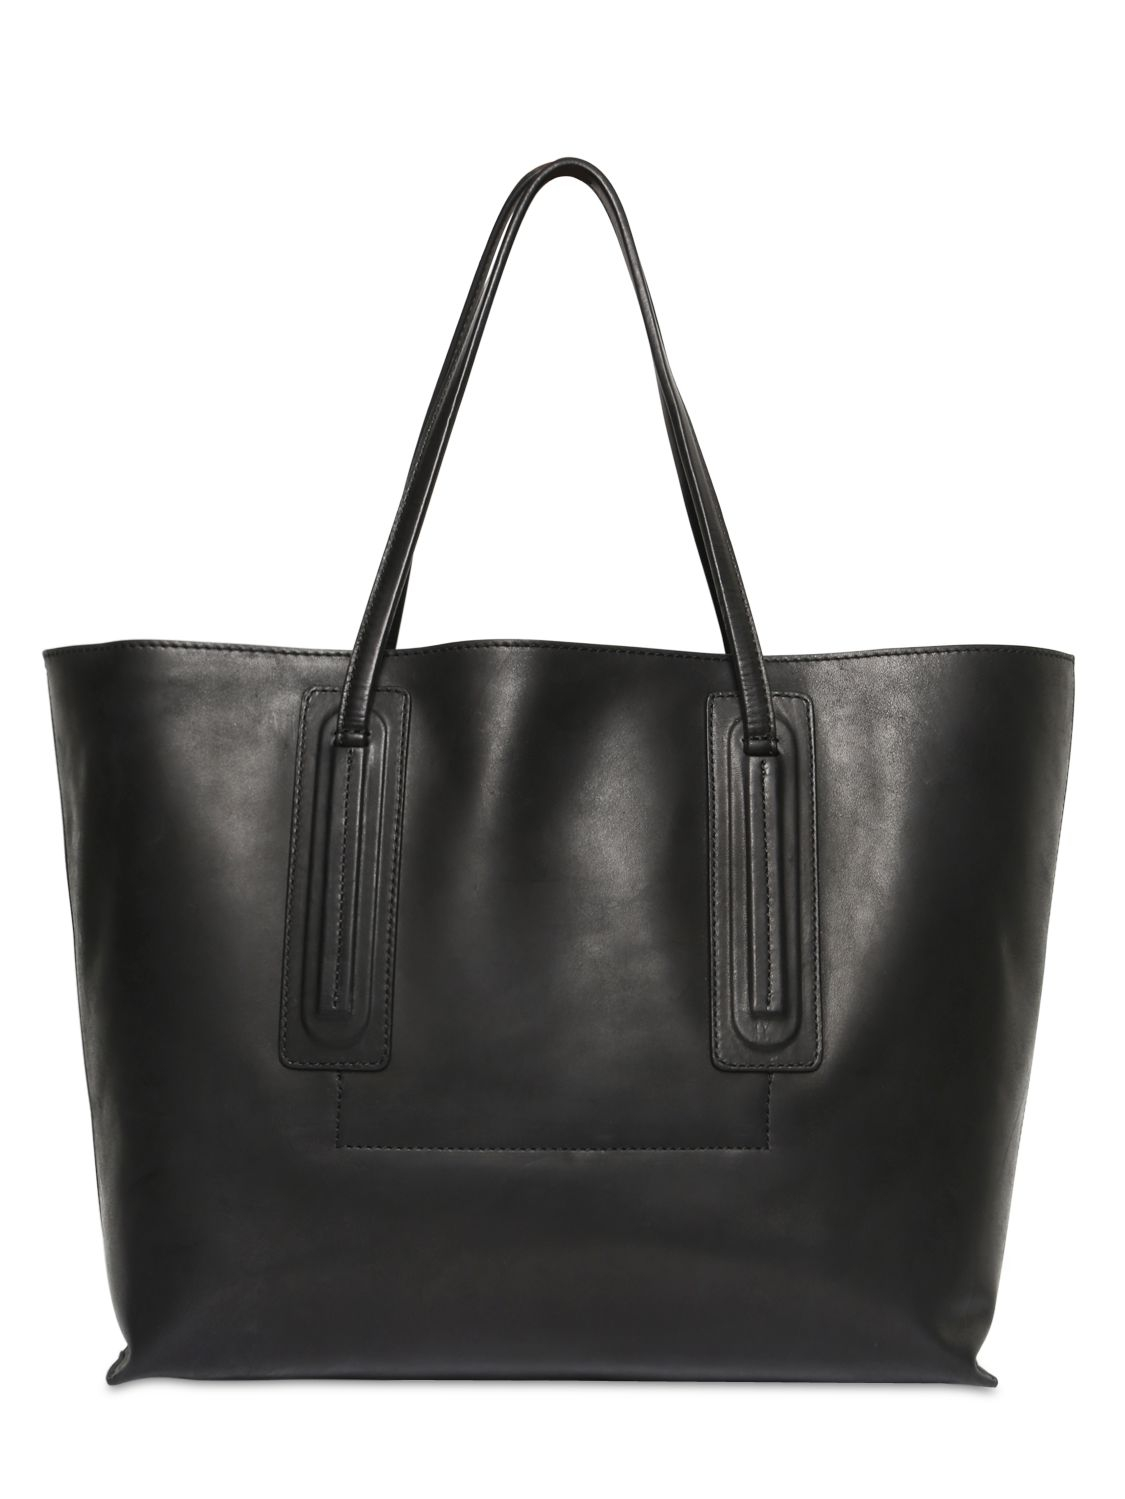 Rick owens Large Horse Leather Tote Bag in Black | Lyst